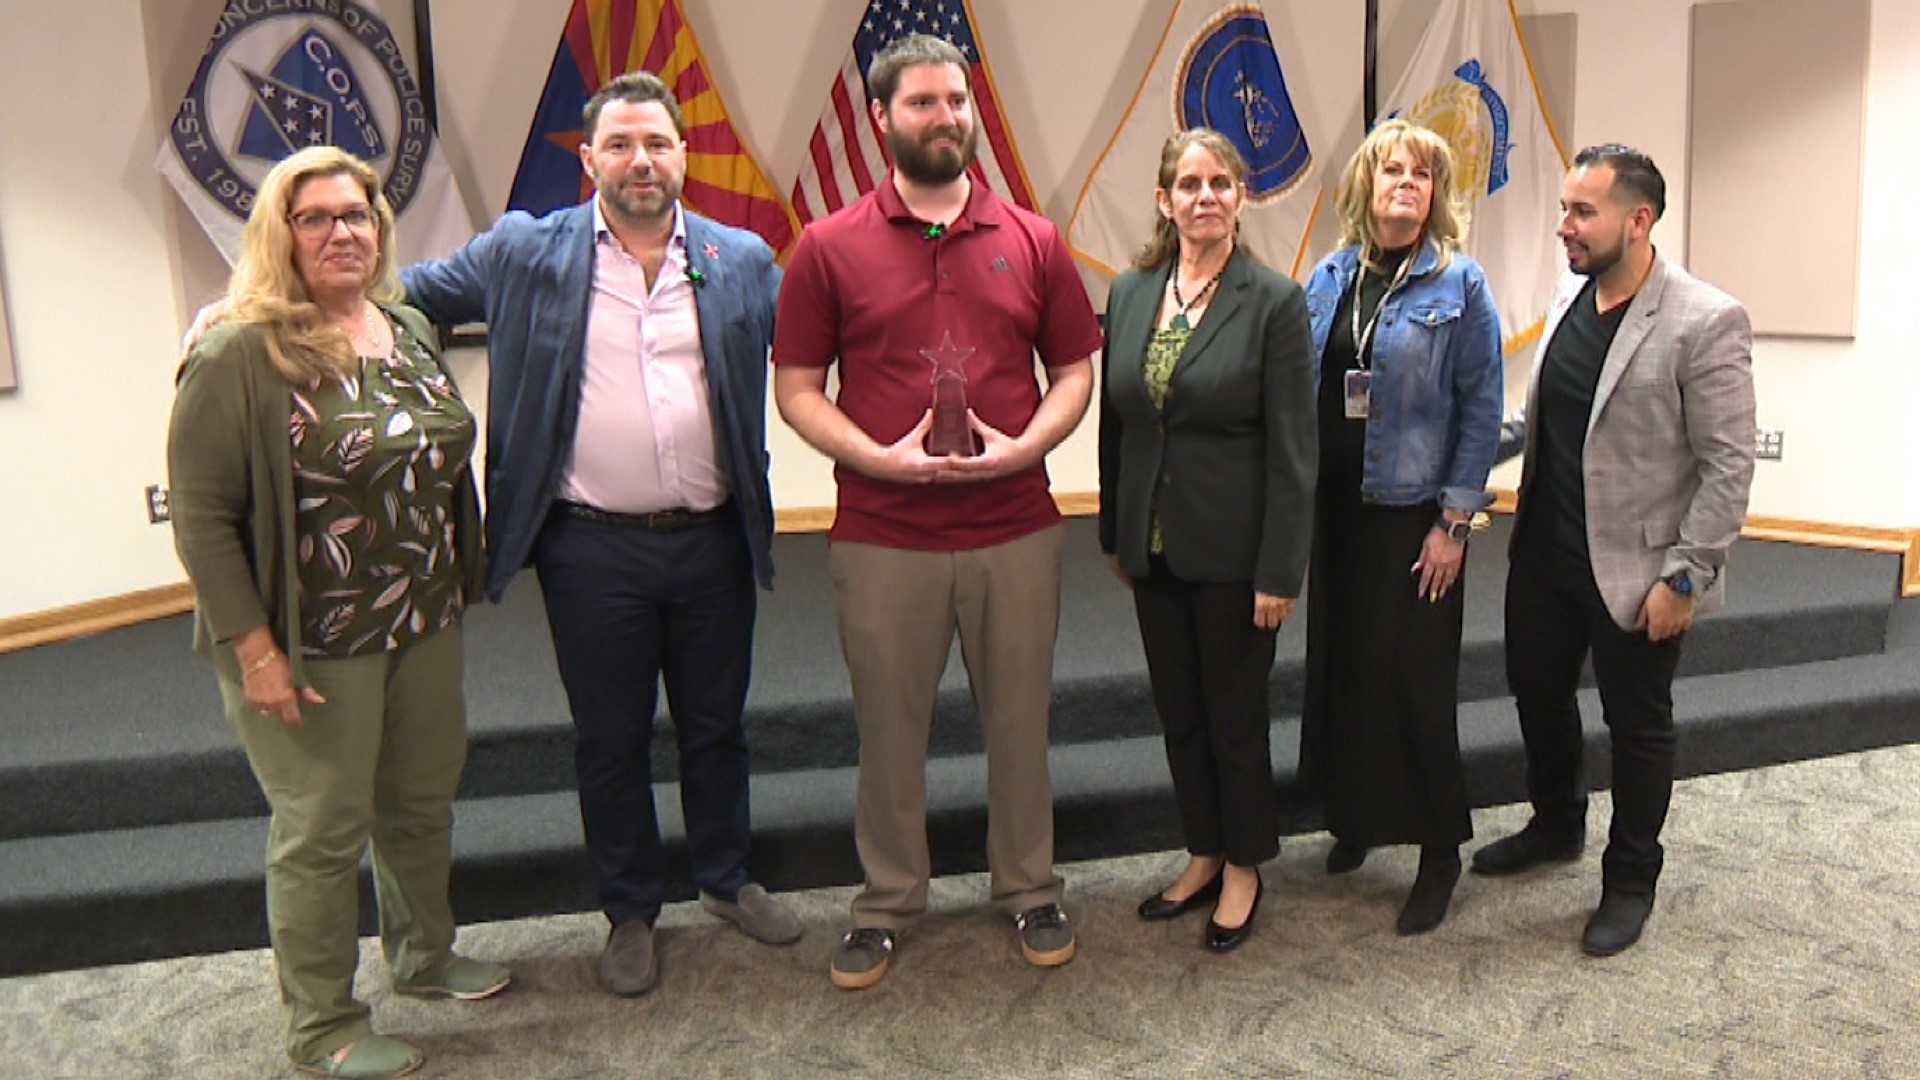 911 dispatcher Derrik Gregg helped save a woman's life in Sept. 2023. Six months later, he received a national award for his efforts. Watch the video for more.